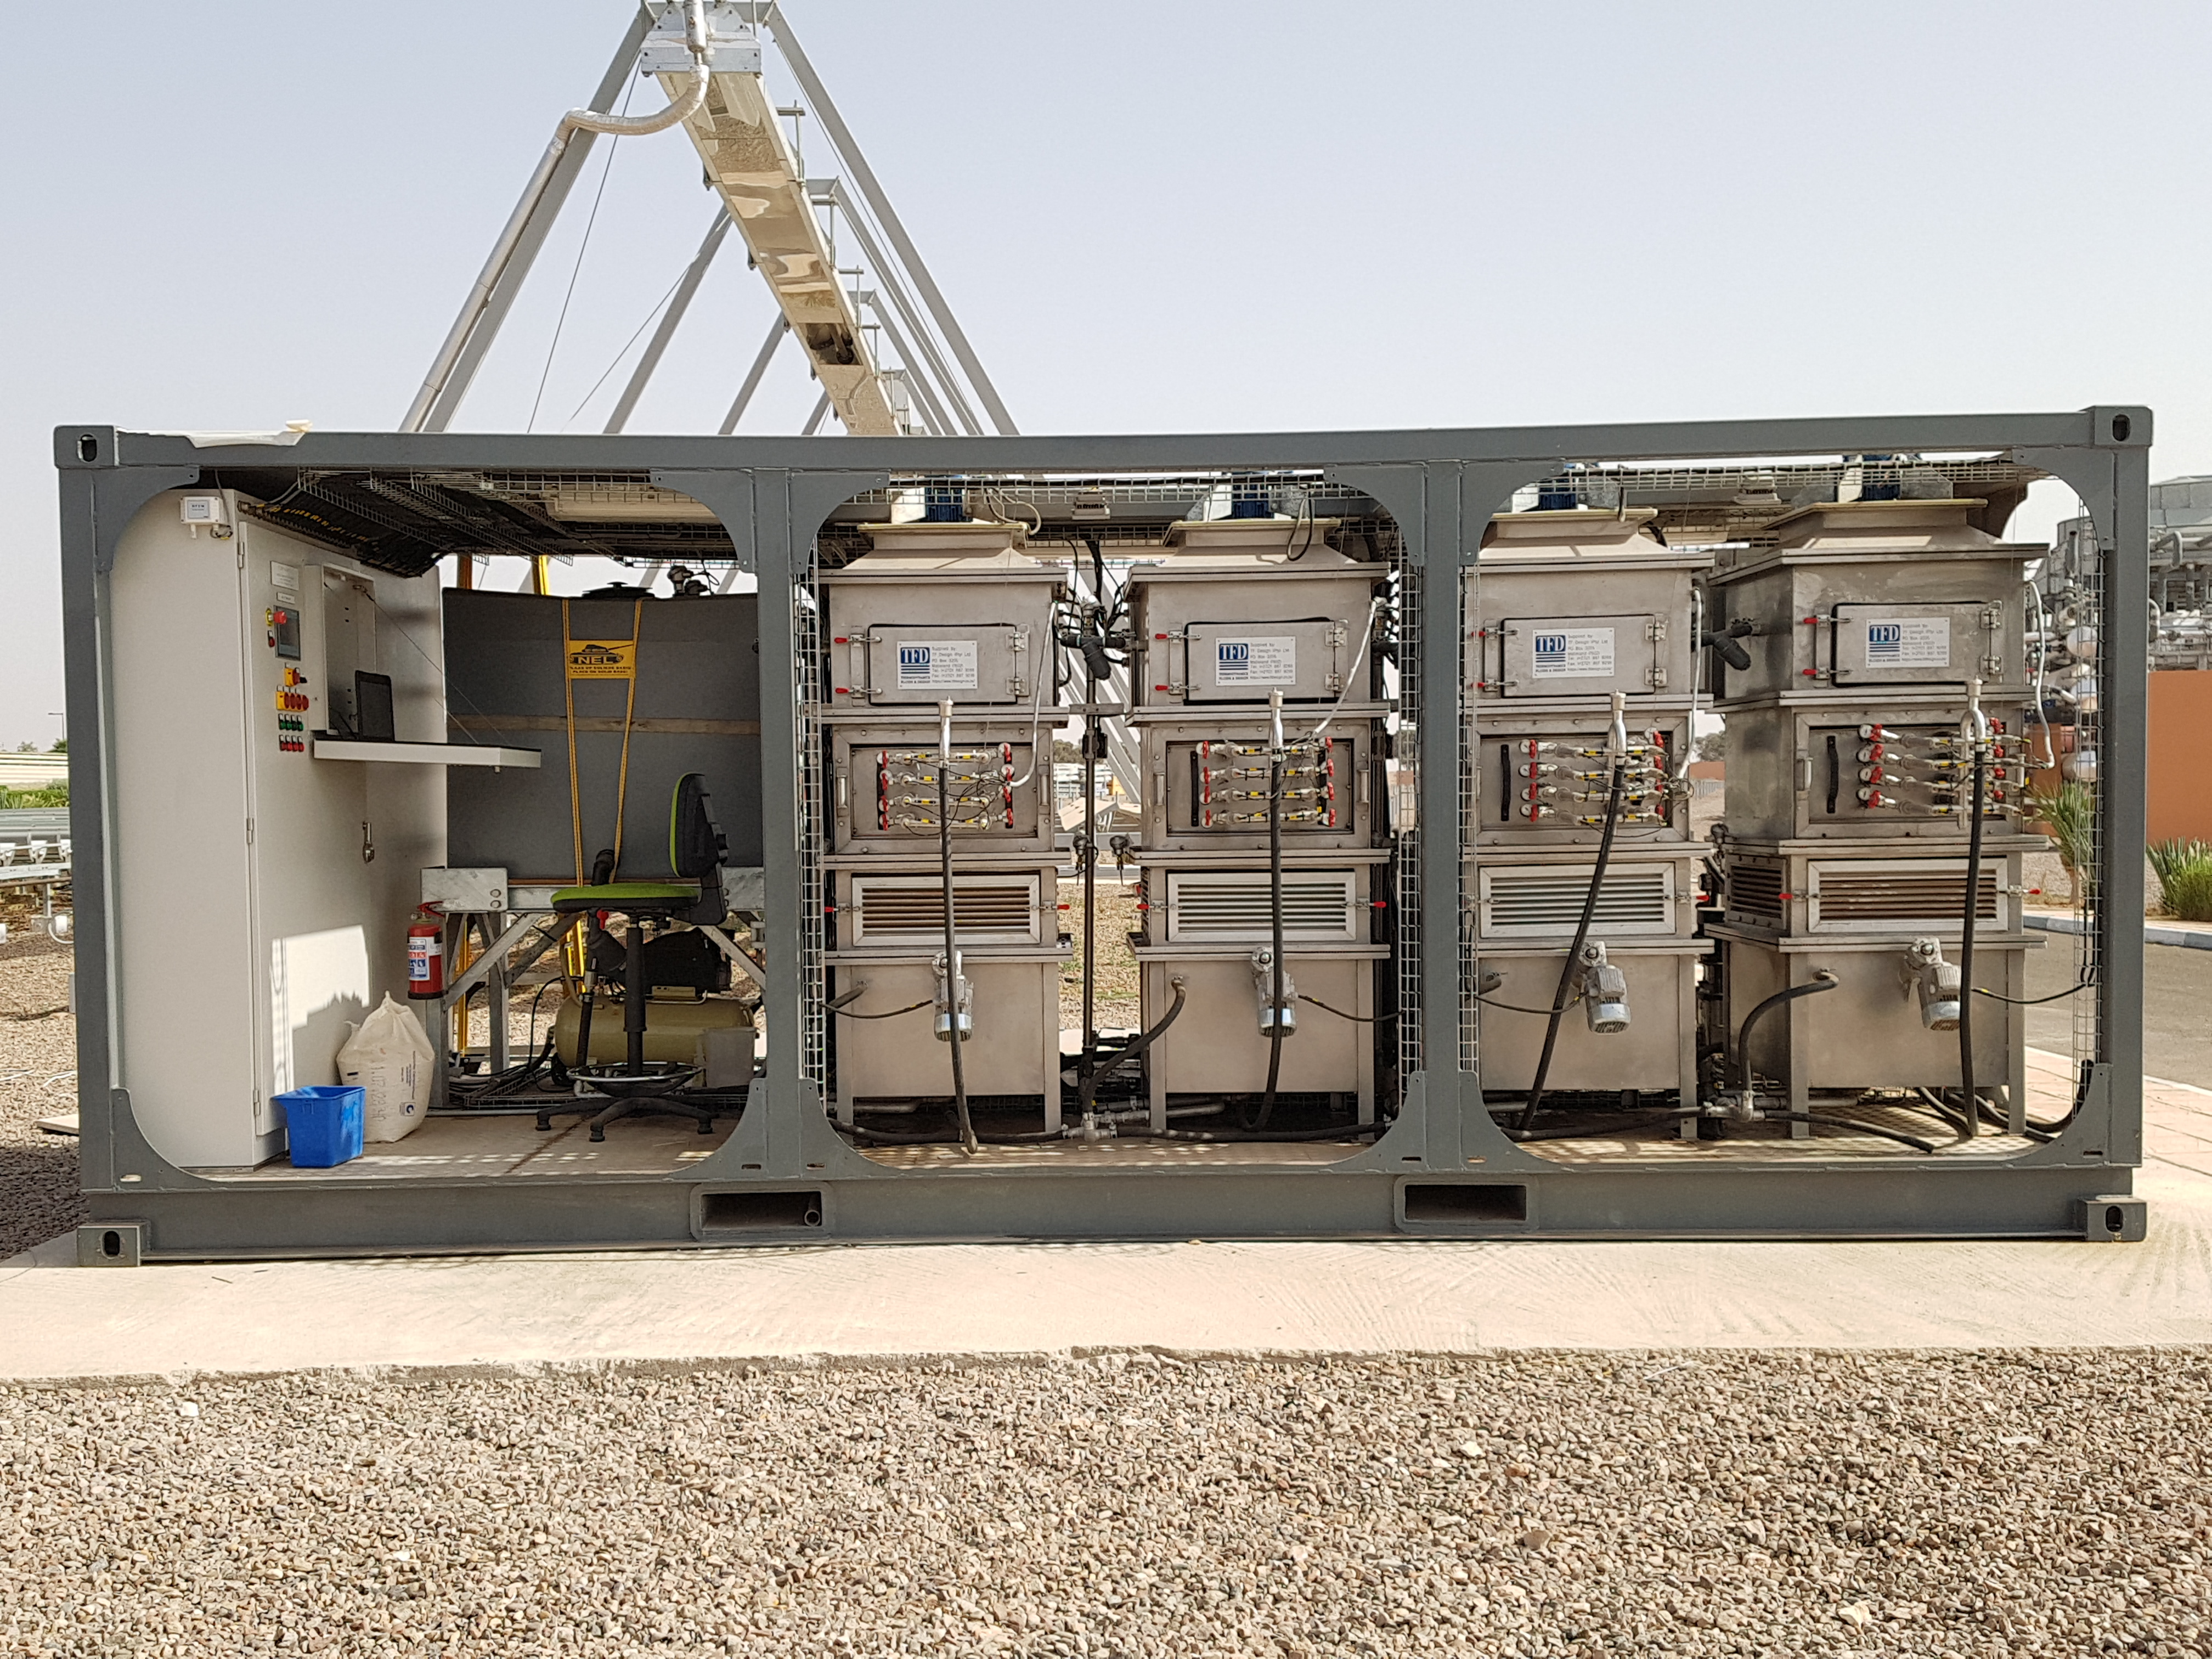 Picture 3: Fouling test rig, Green Energy Park in Morocco (photo: IRESEN/ENEXIO)